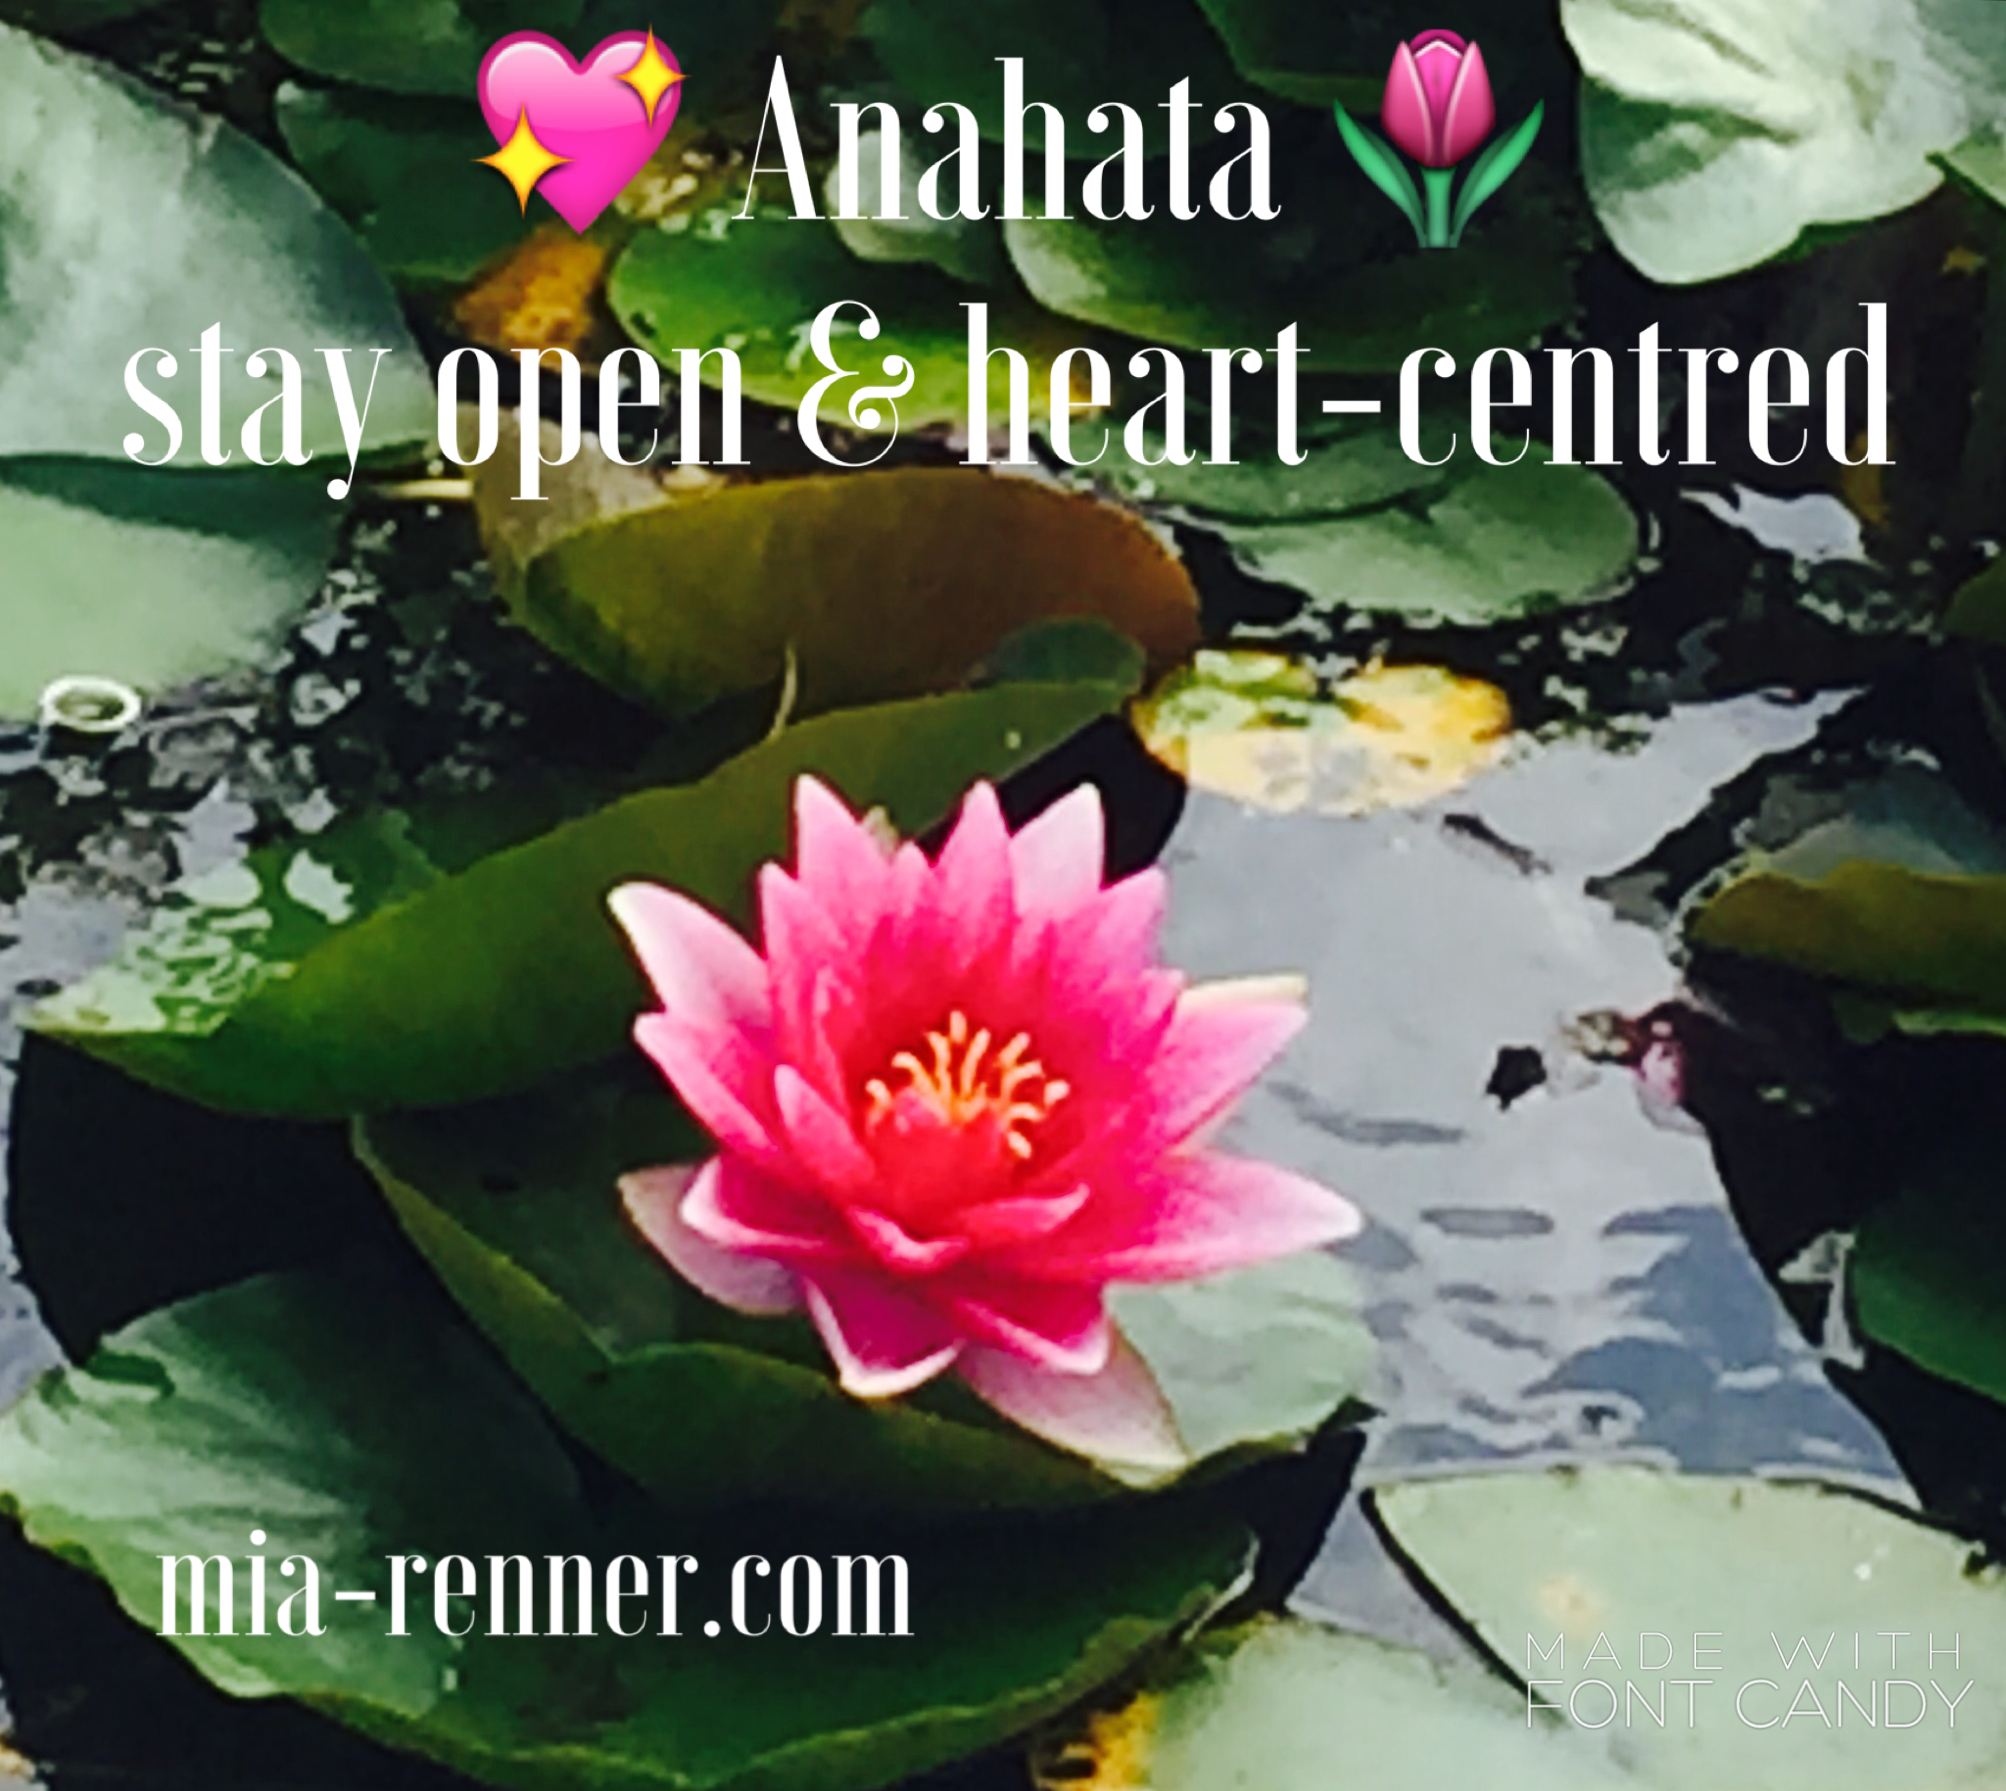 Staying open & heart-centred